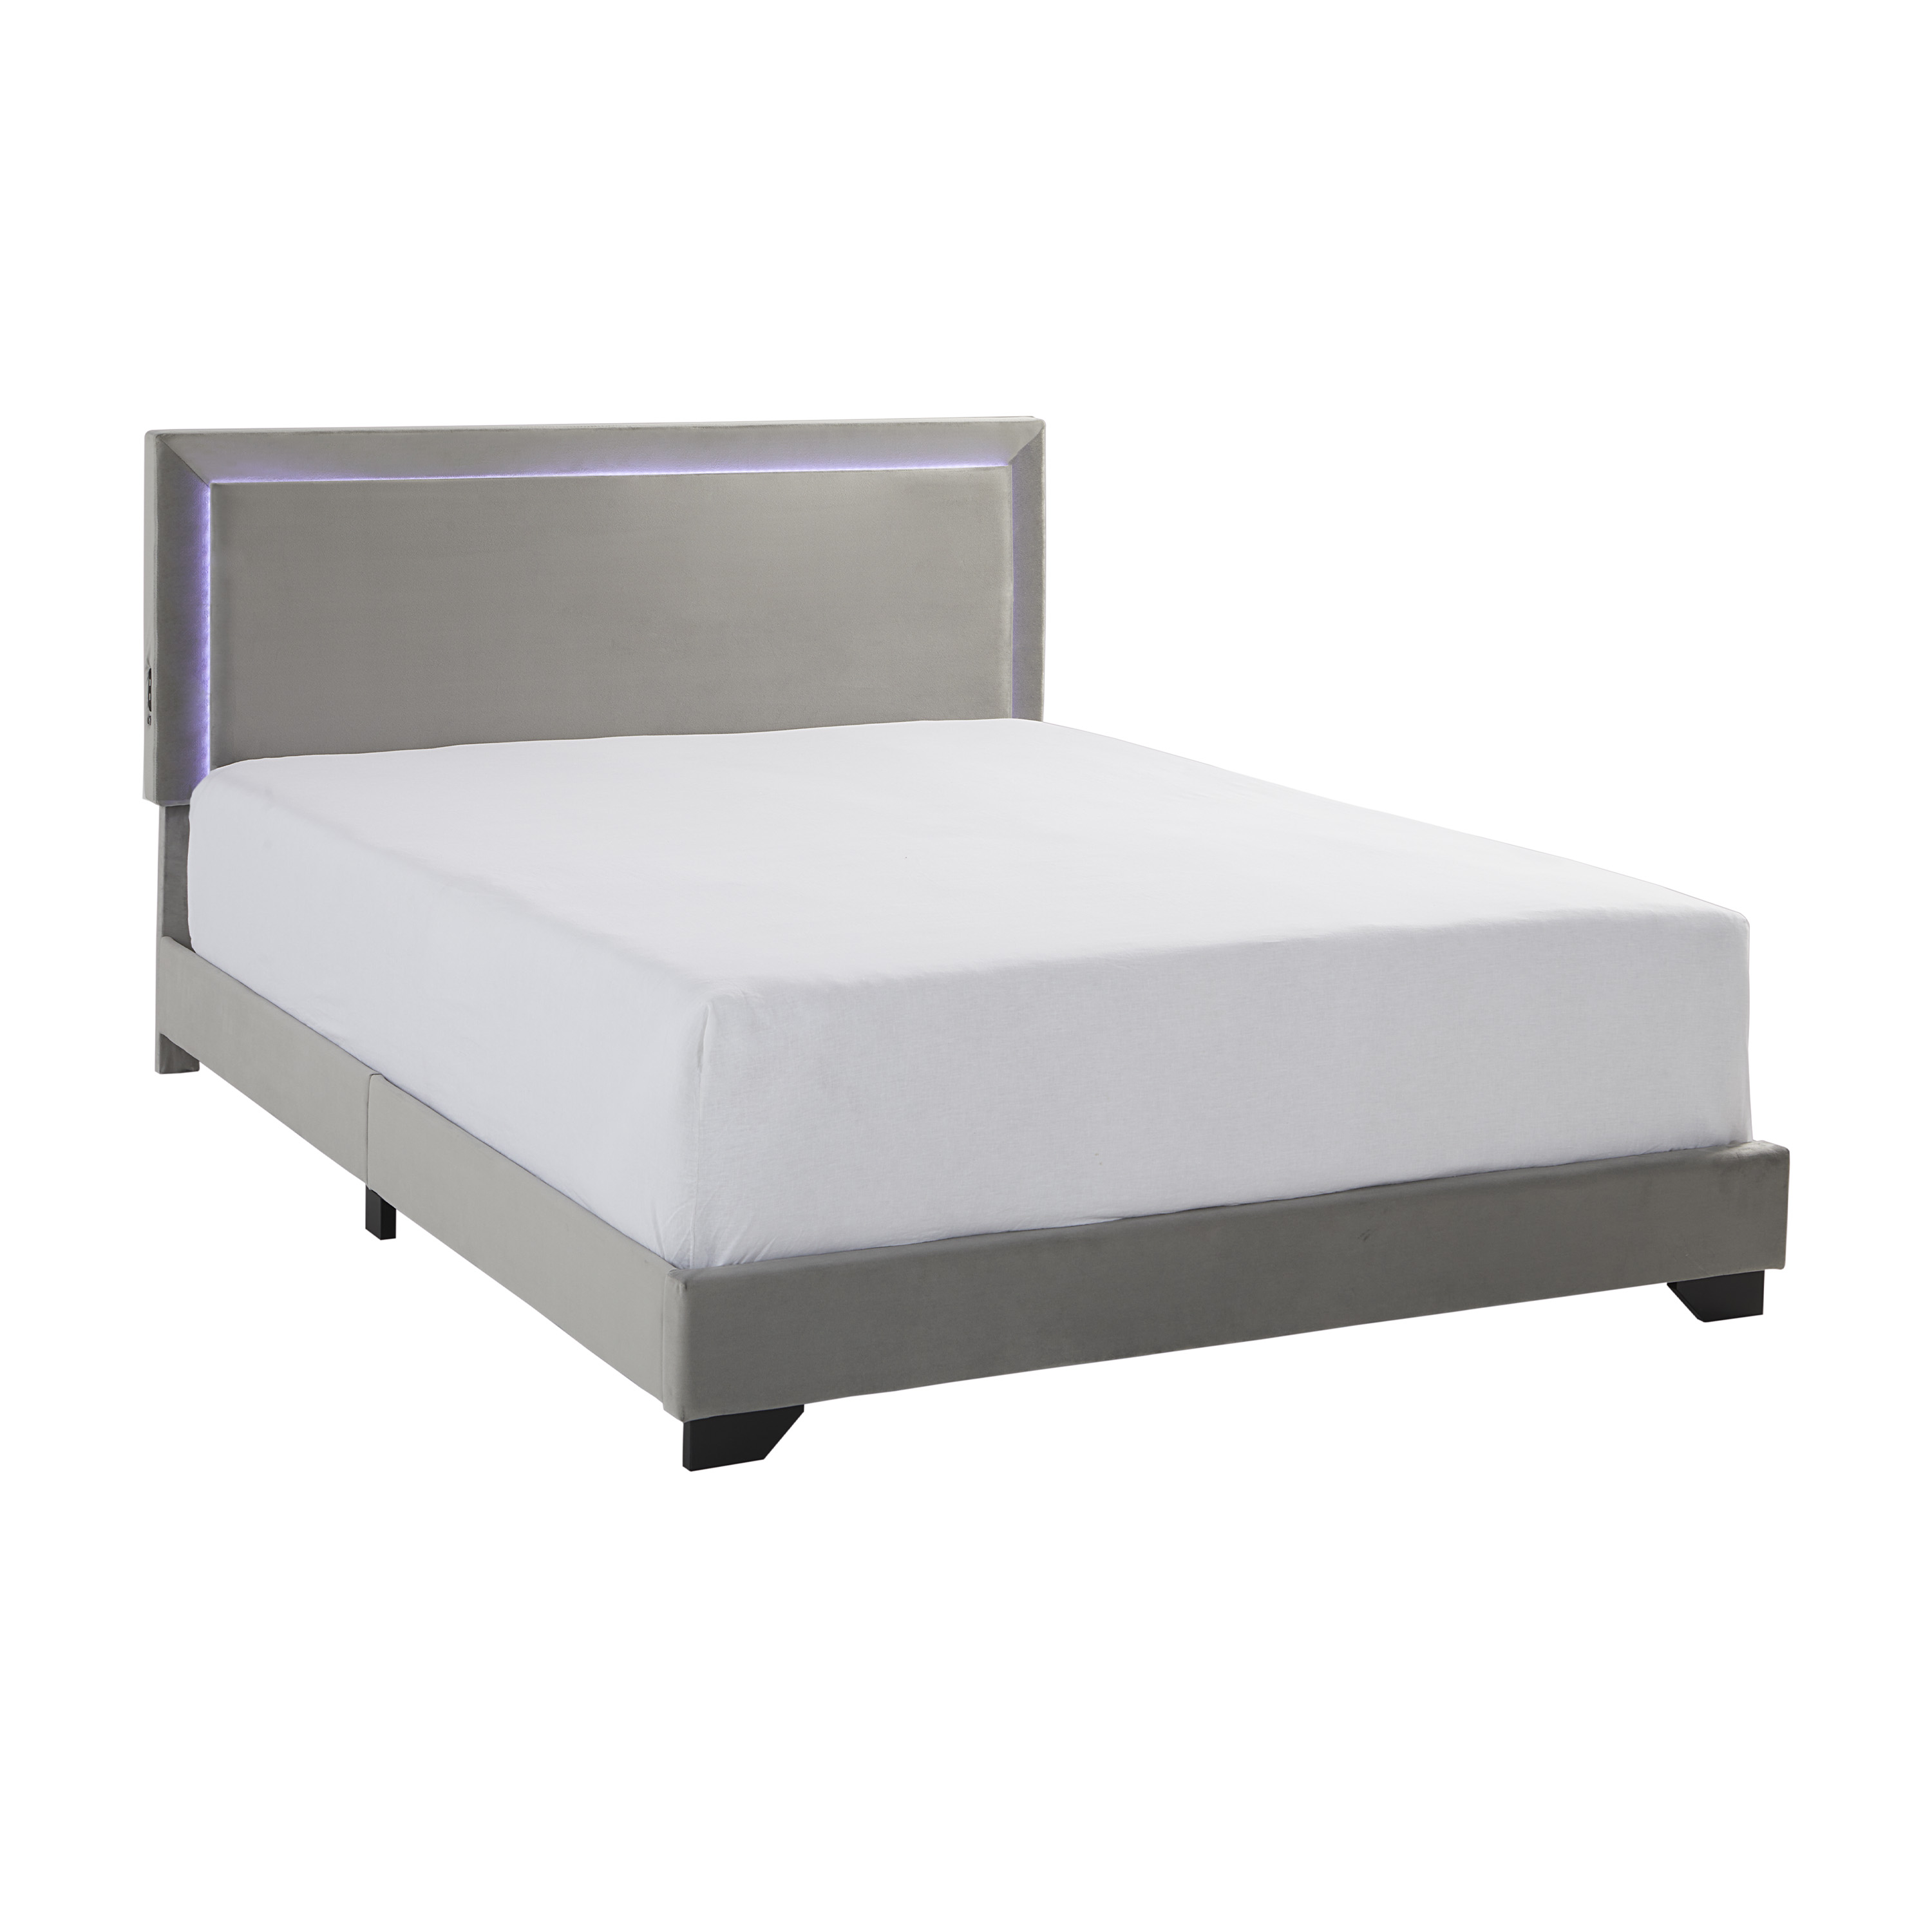 Anchorage Upholstered Bed